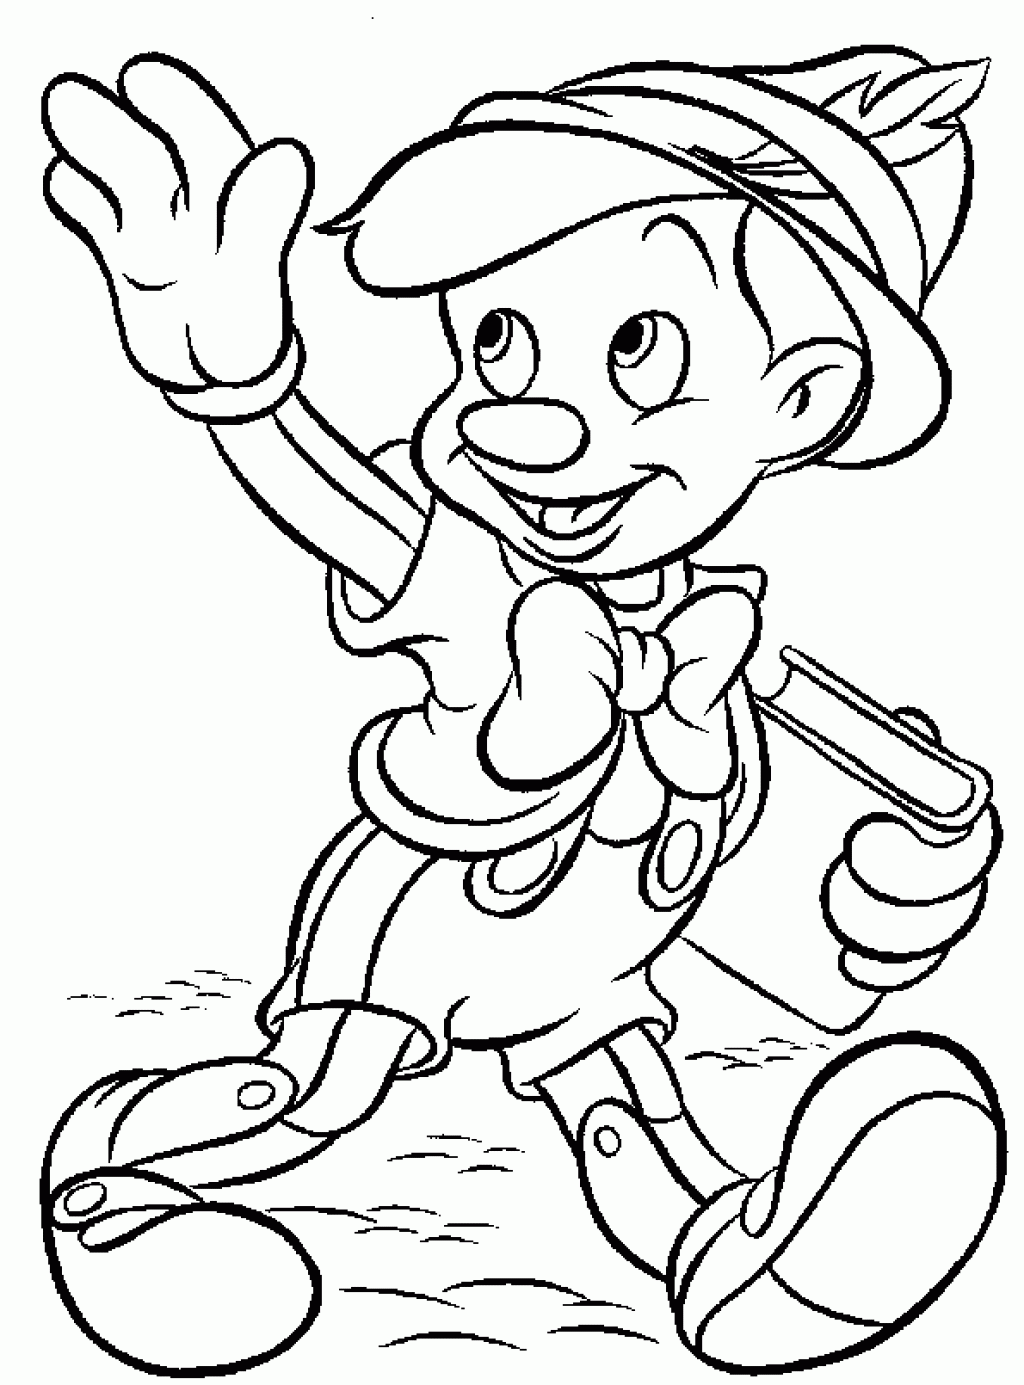 342 Simple Coloring Pages For Kids To Print Pdf for Adult